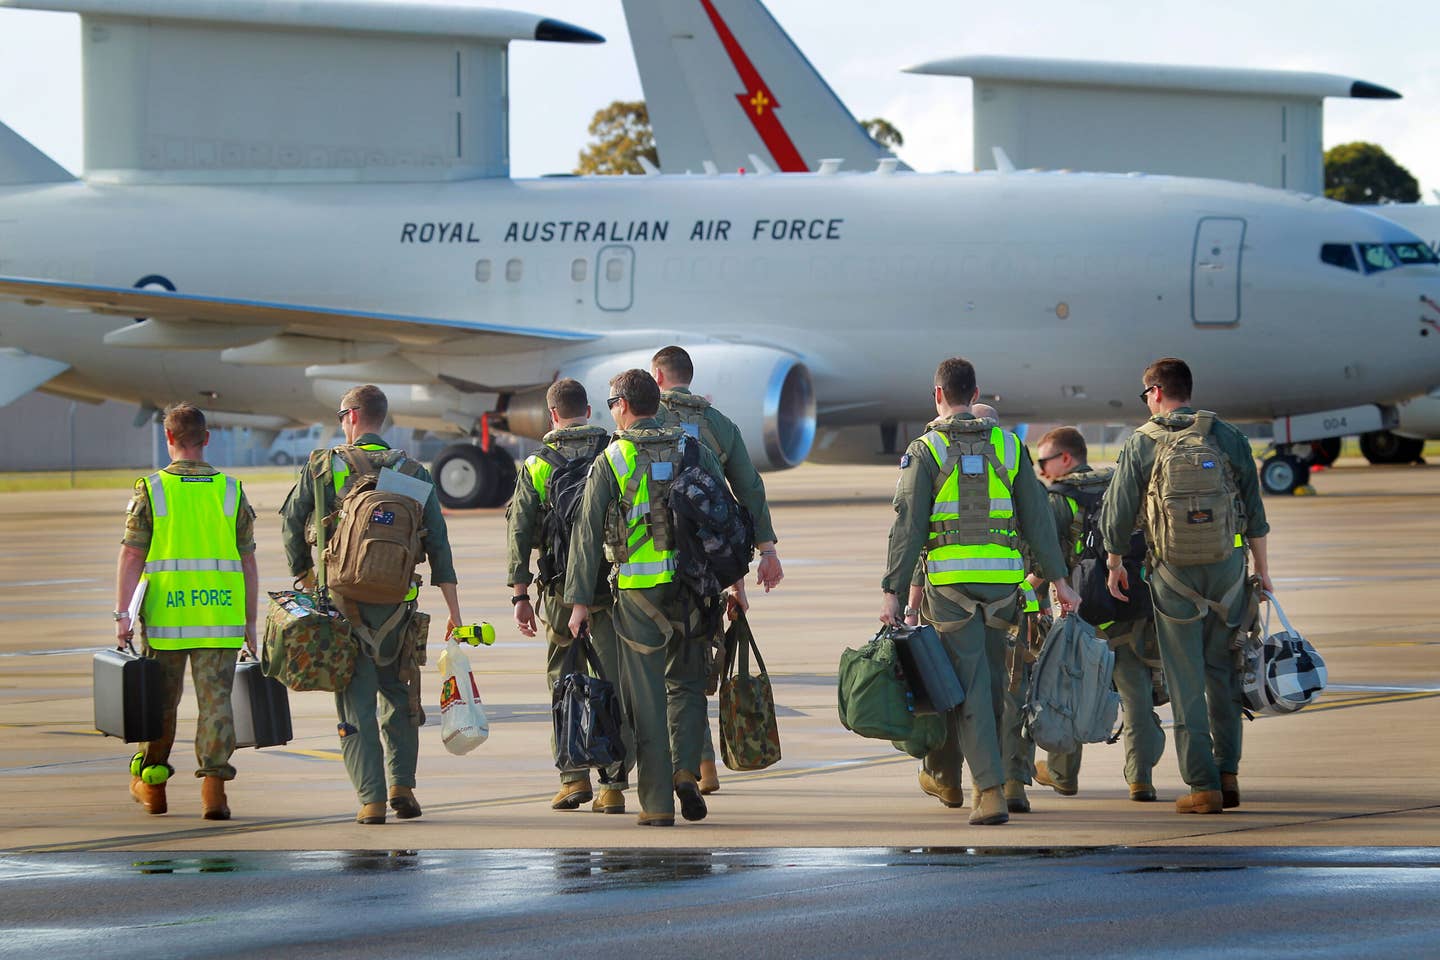 An aircrew prepares to board a Royal Australian Air Force E-7A Wedgetail Airborne Early Warning and Control aircraft. (Photo by CPL Melina Young/Royal Australian Air Force via Getty Images)